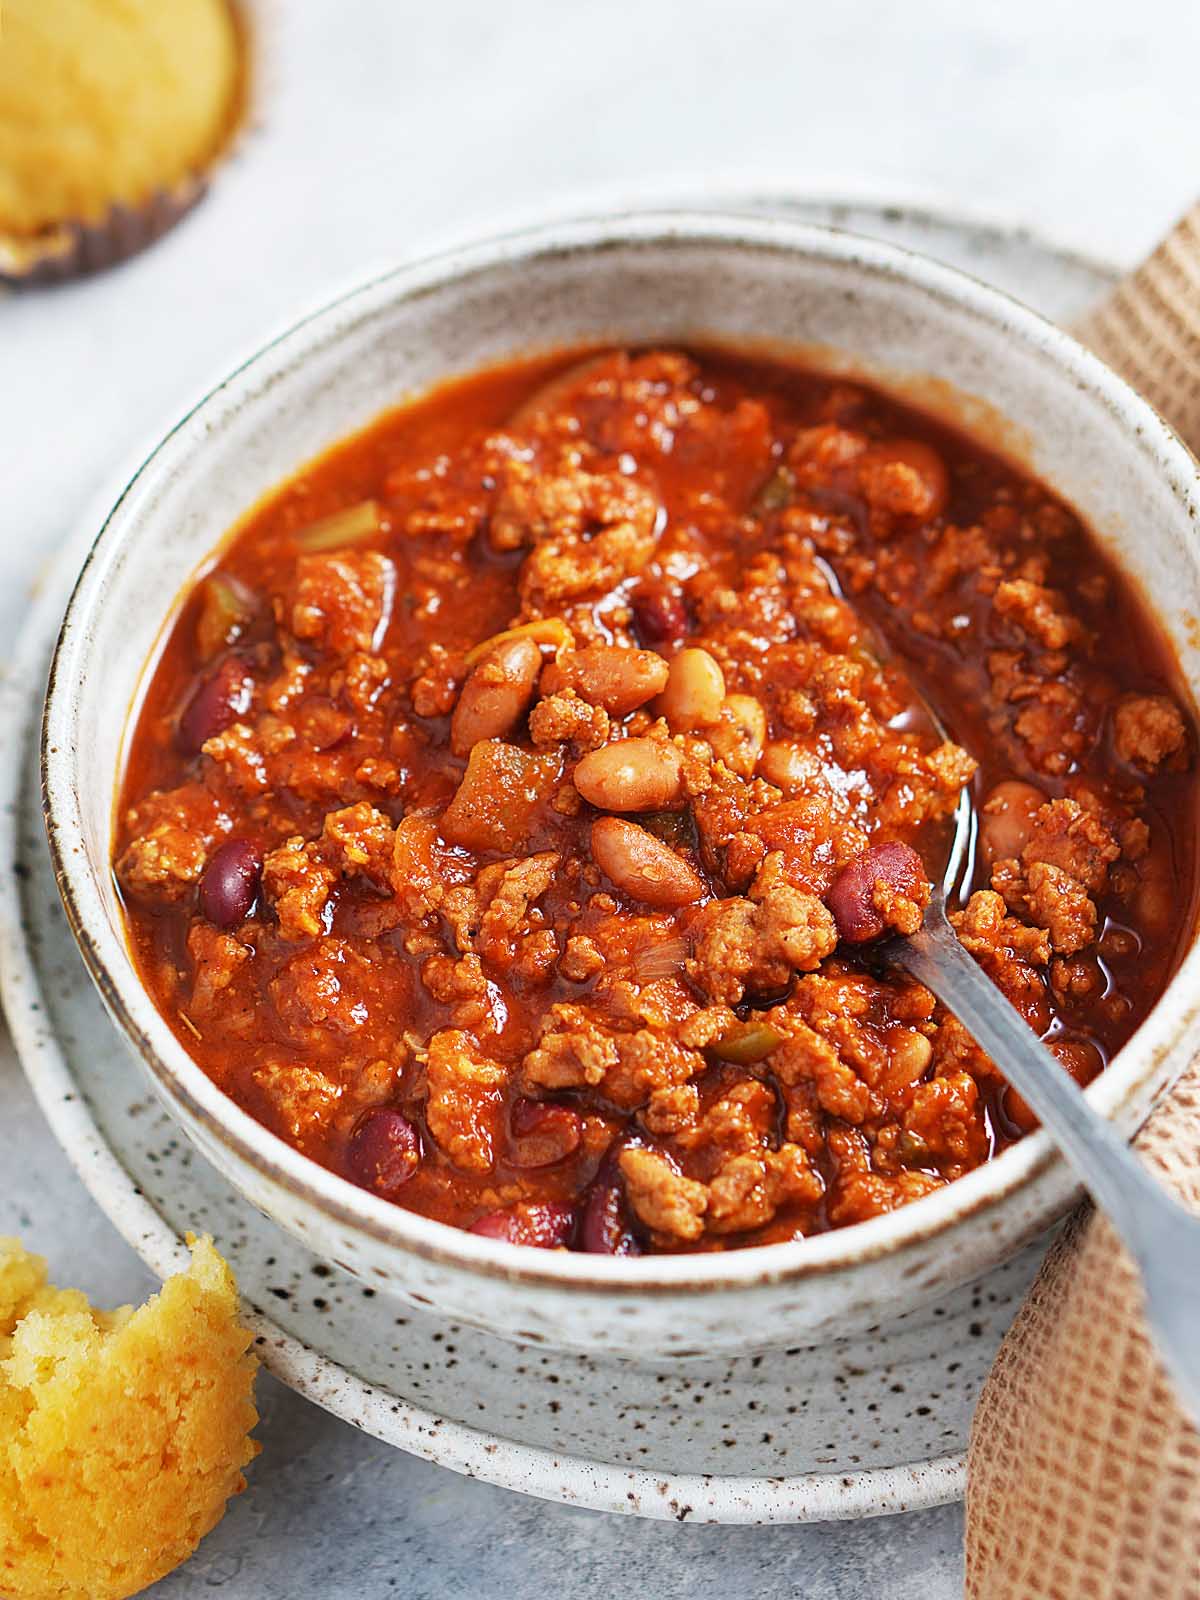 A bowl with chili with cornbread muffins on the side.